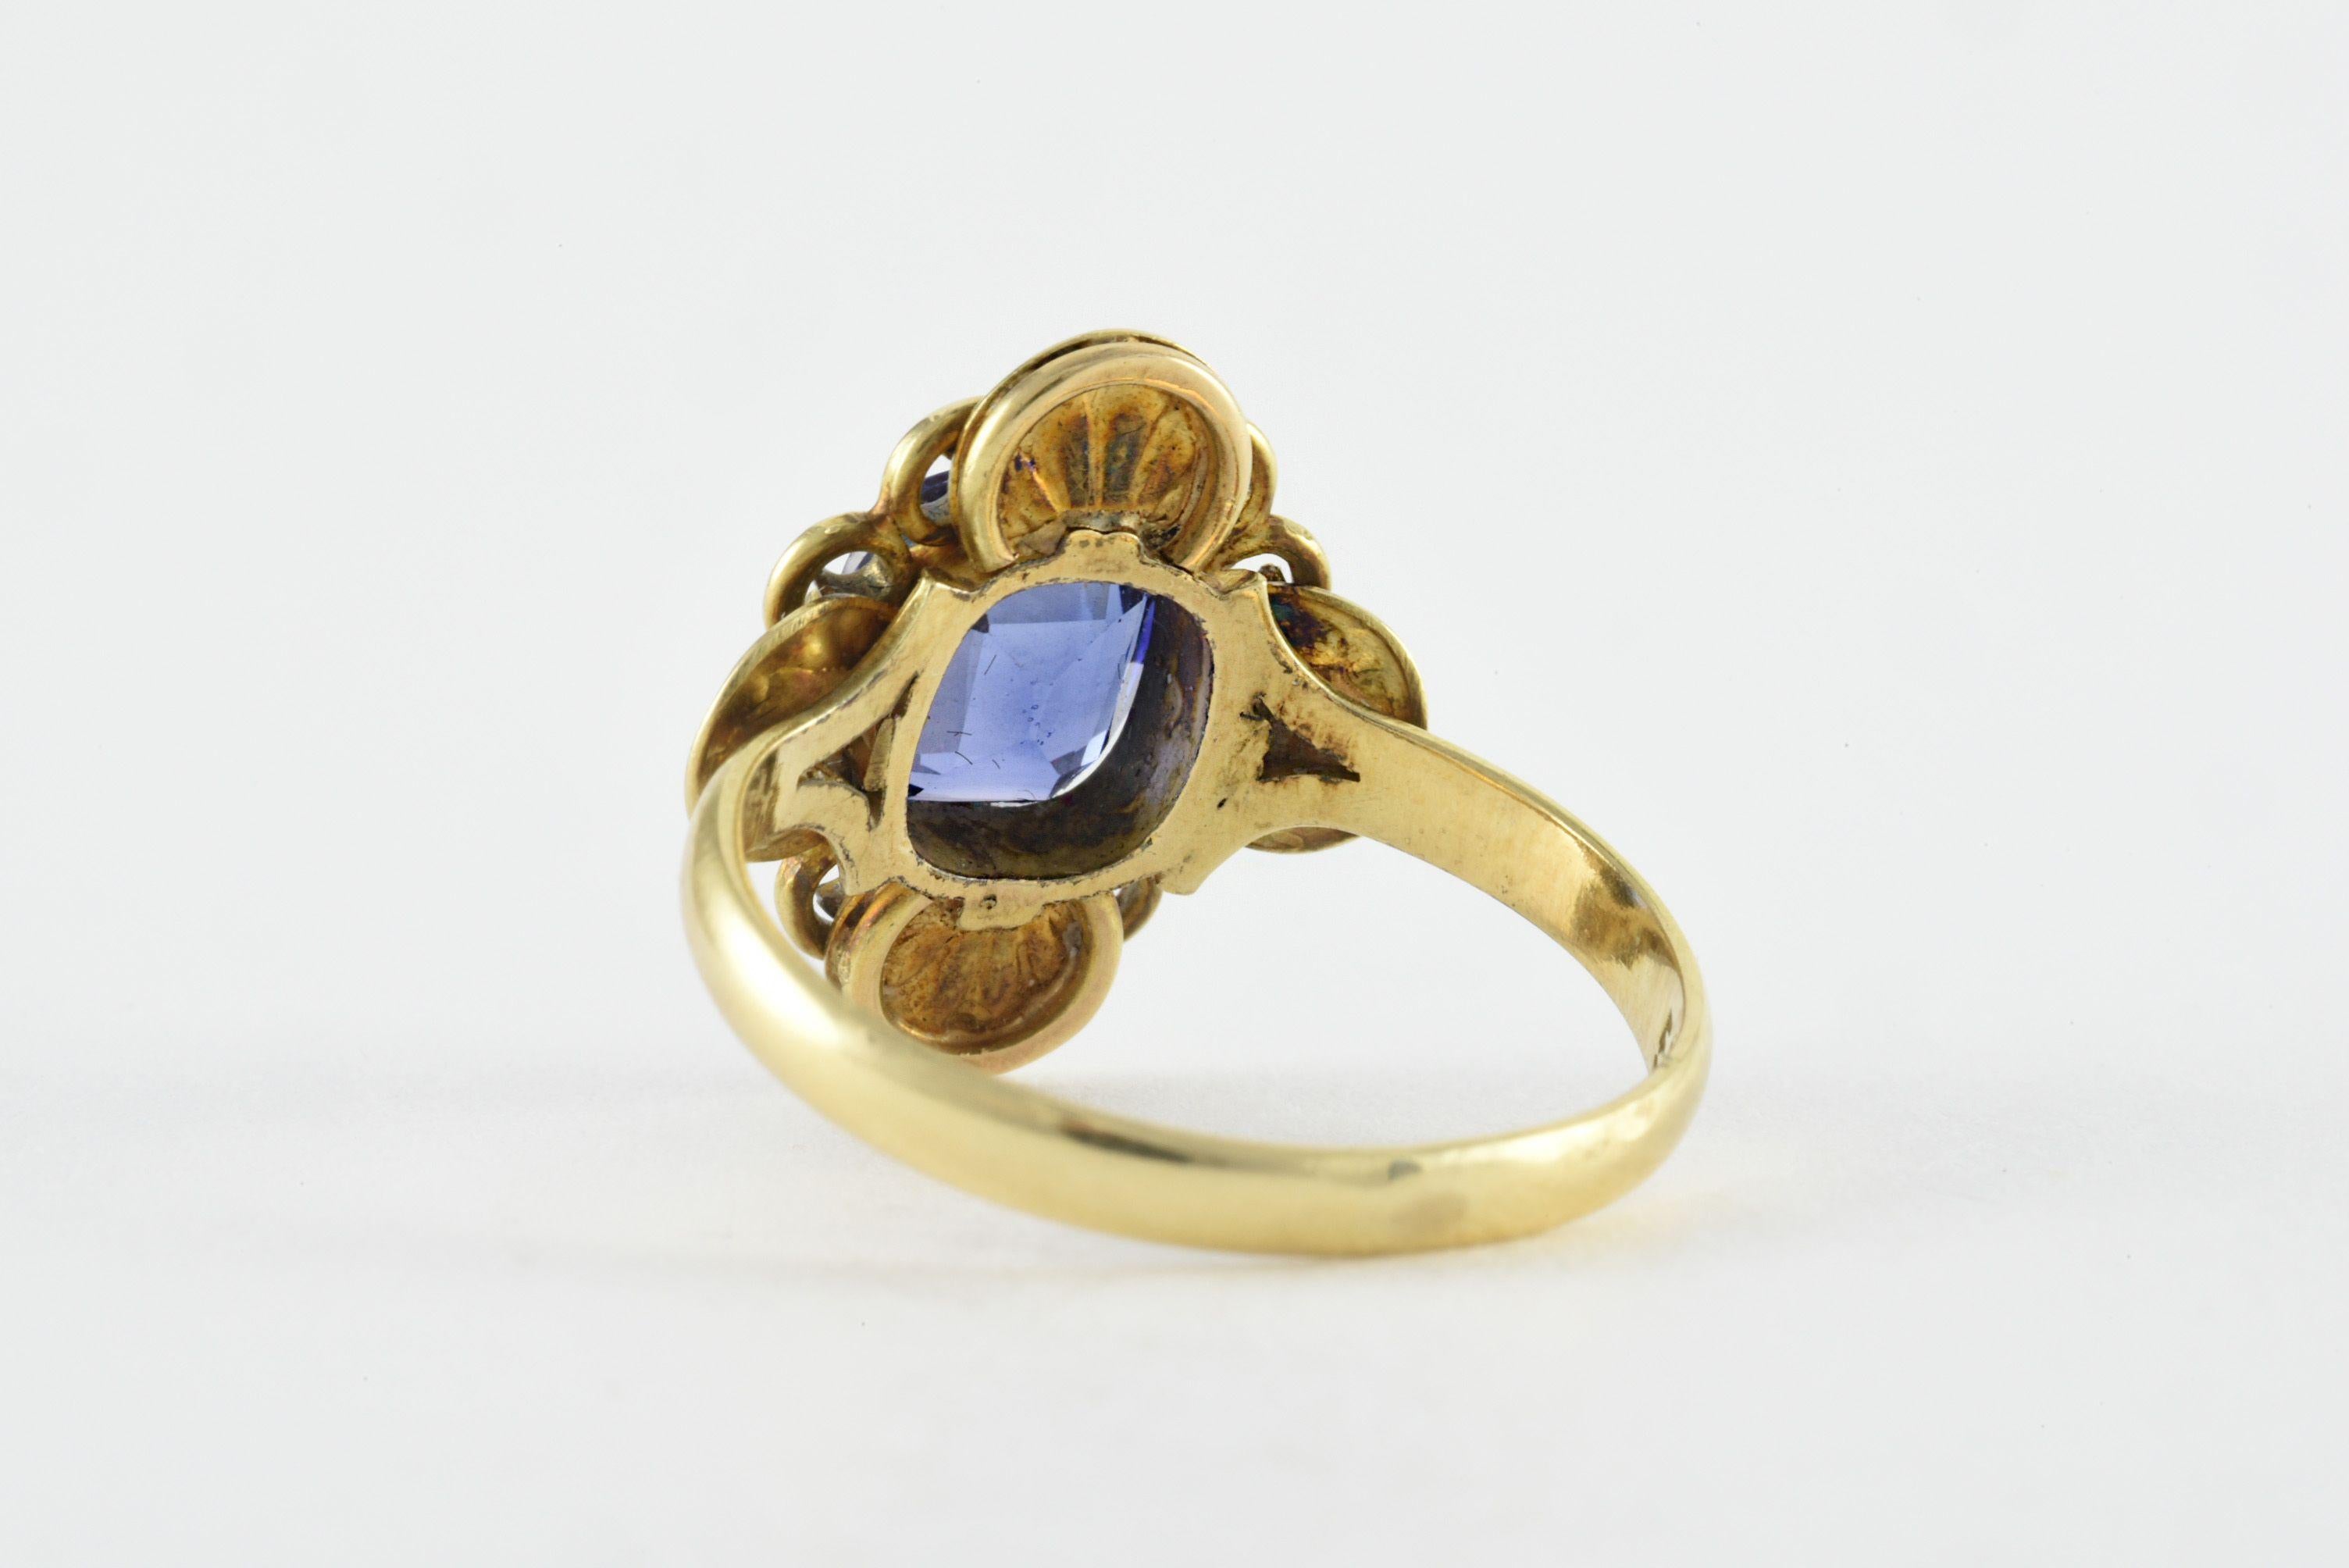 A vibrant blue cushion-cut synthetic sapphire measuring 6.4 x 7.5 x 3.8mm centers this vintage band fashioned from 14kt yellow gold surrounded by a swirling floral design. Stamped 